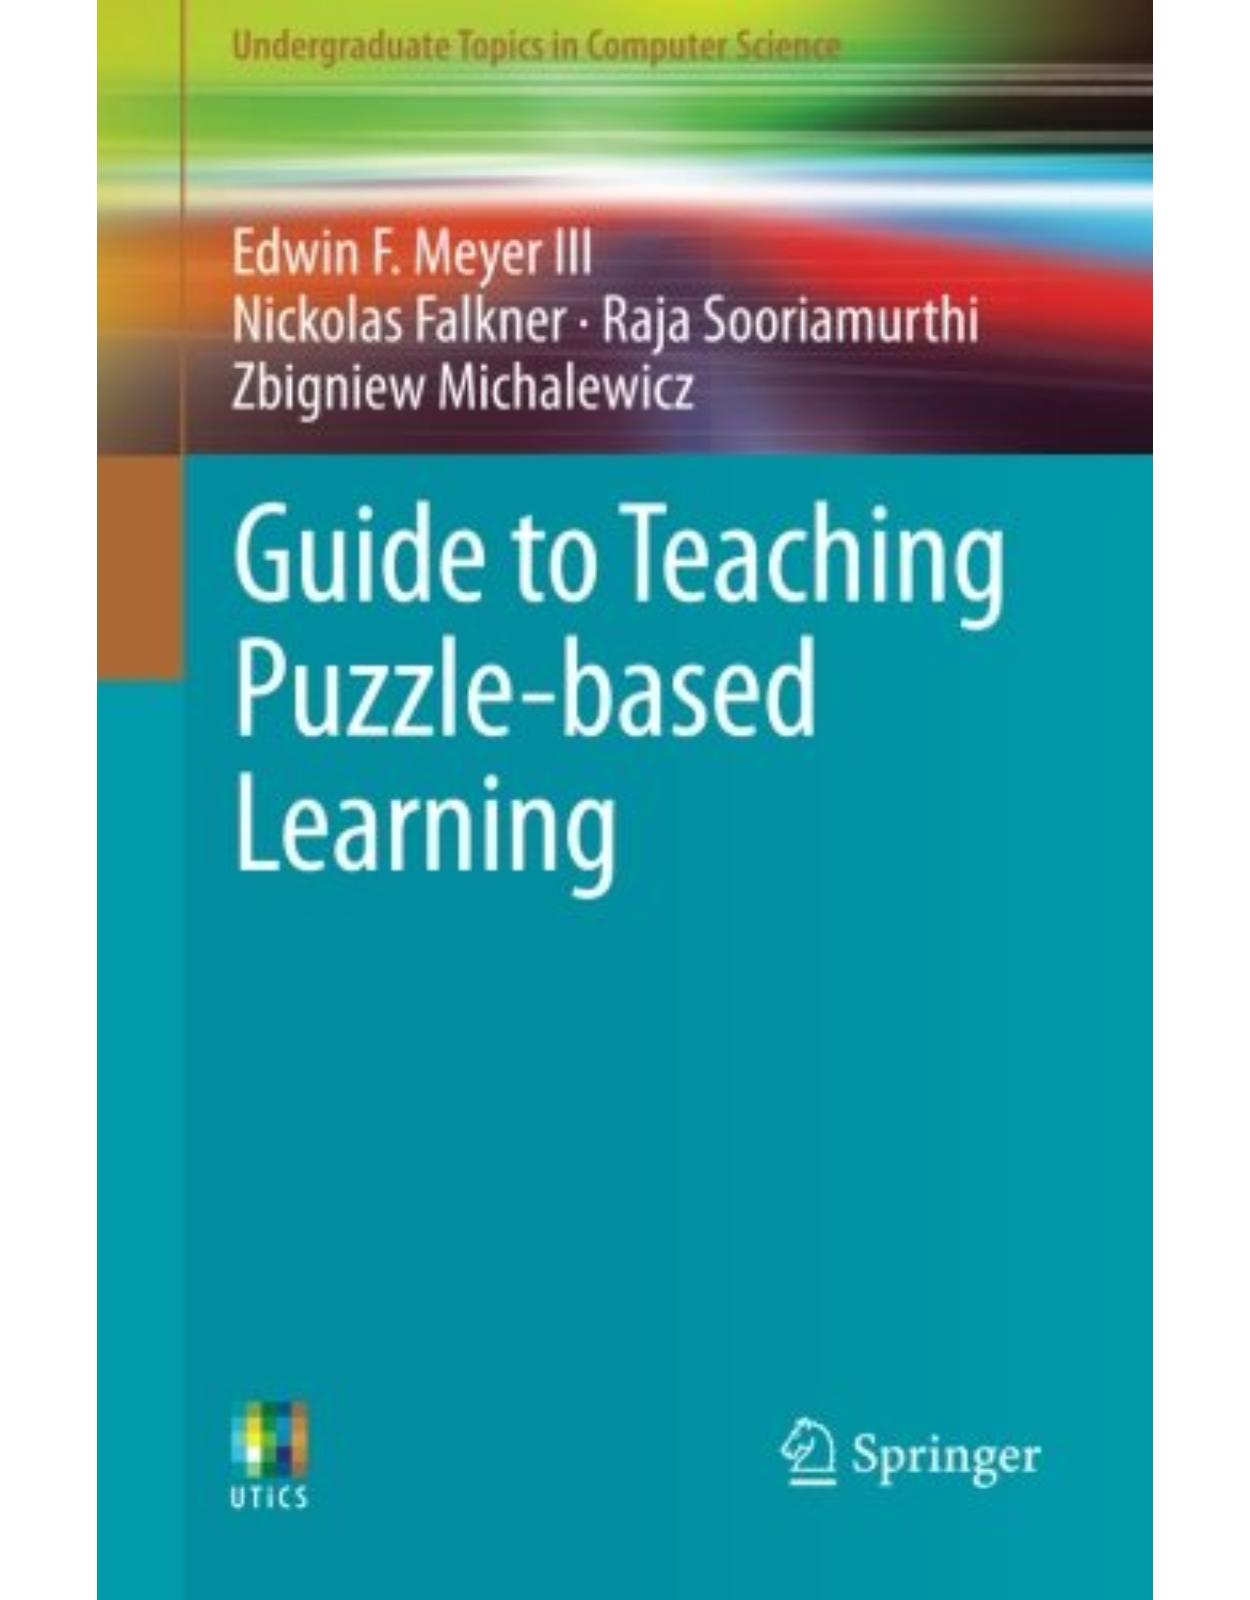 Guide to Teaching Puzzlebased Learning